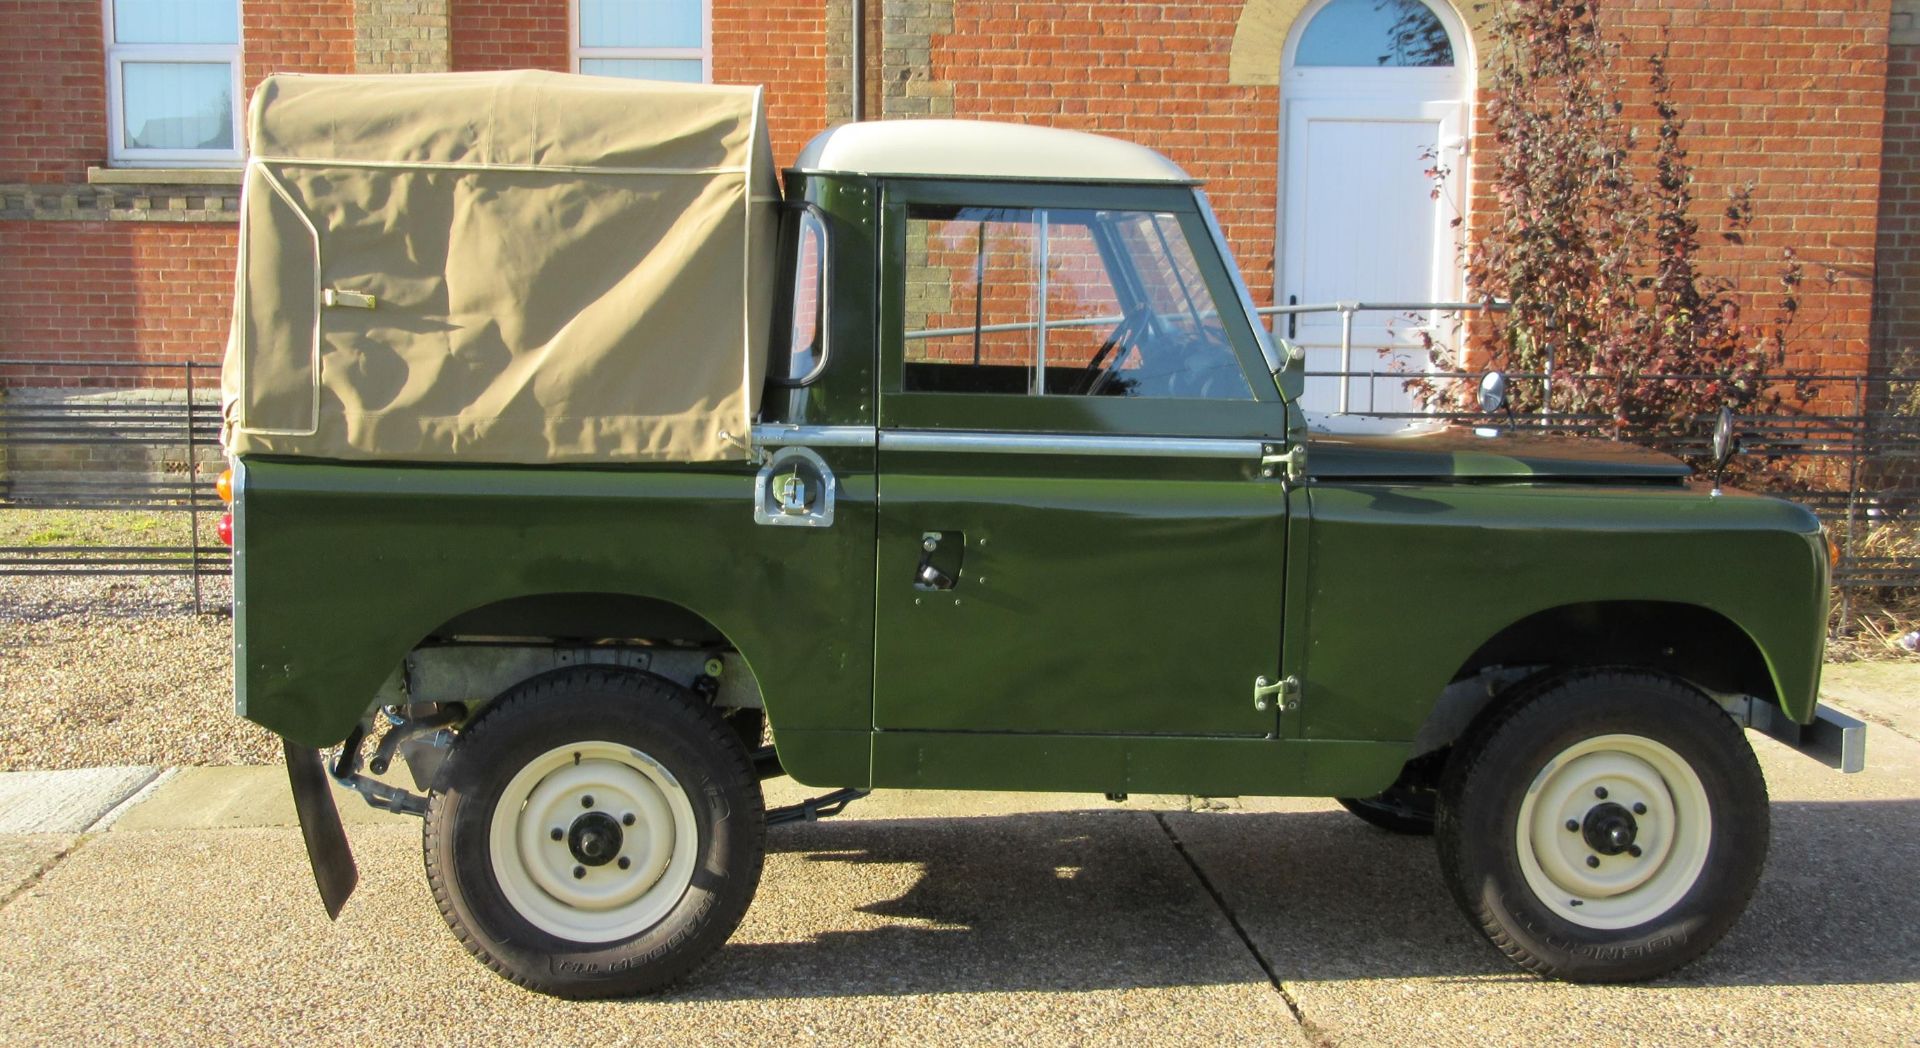 1963 Land Rover Series IIA 88" 'Olive' - Image 5 of 10